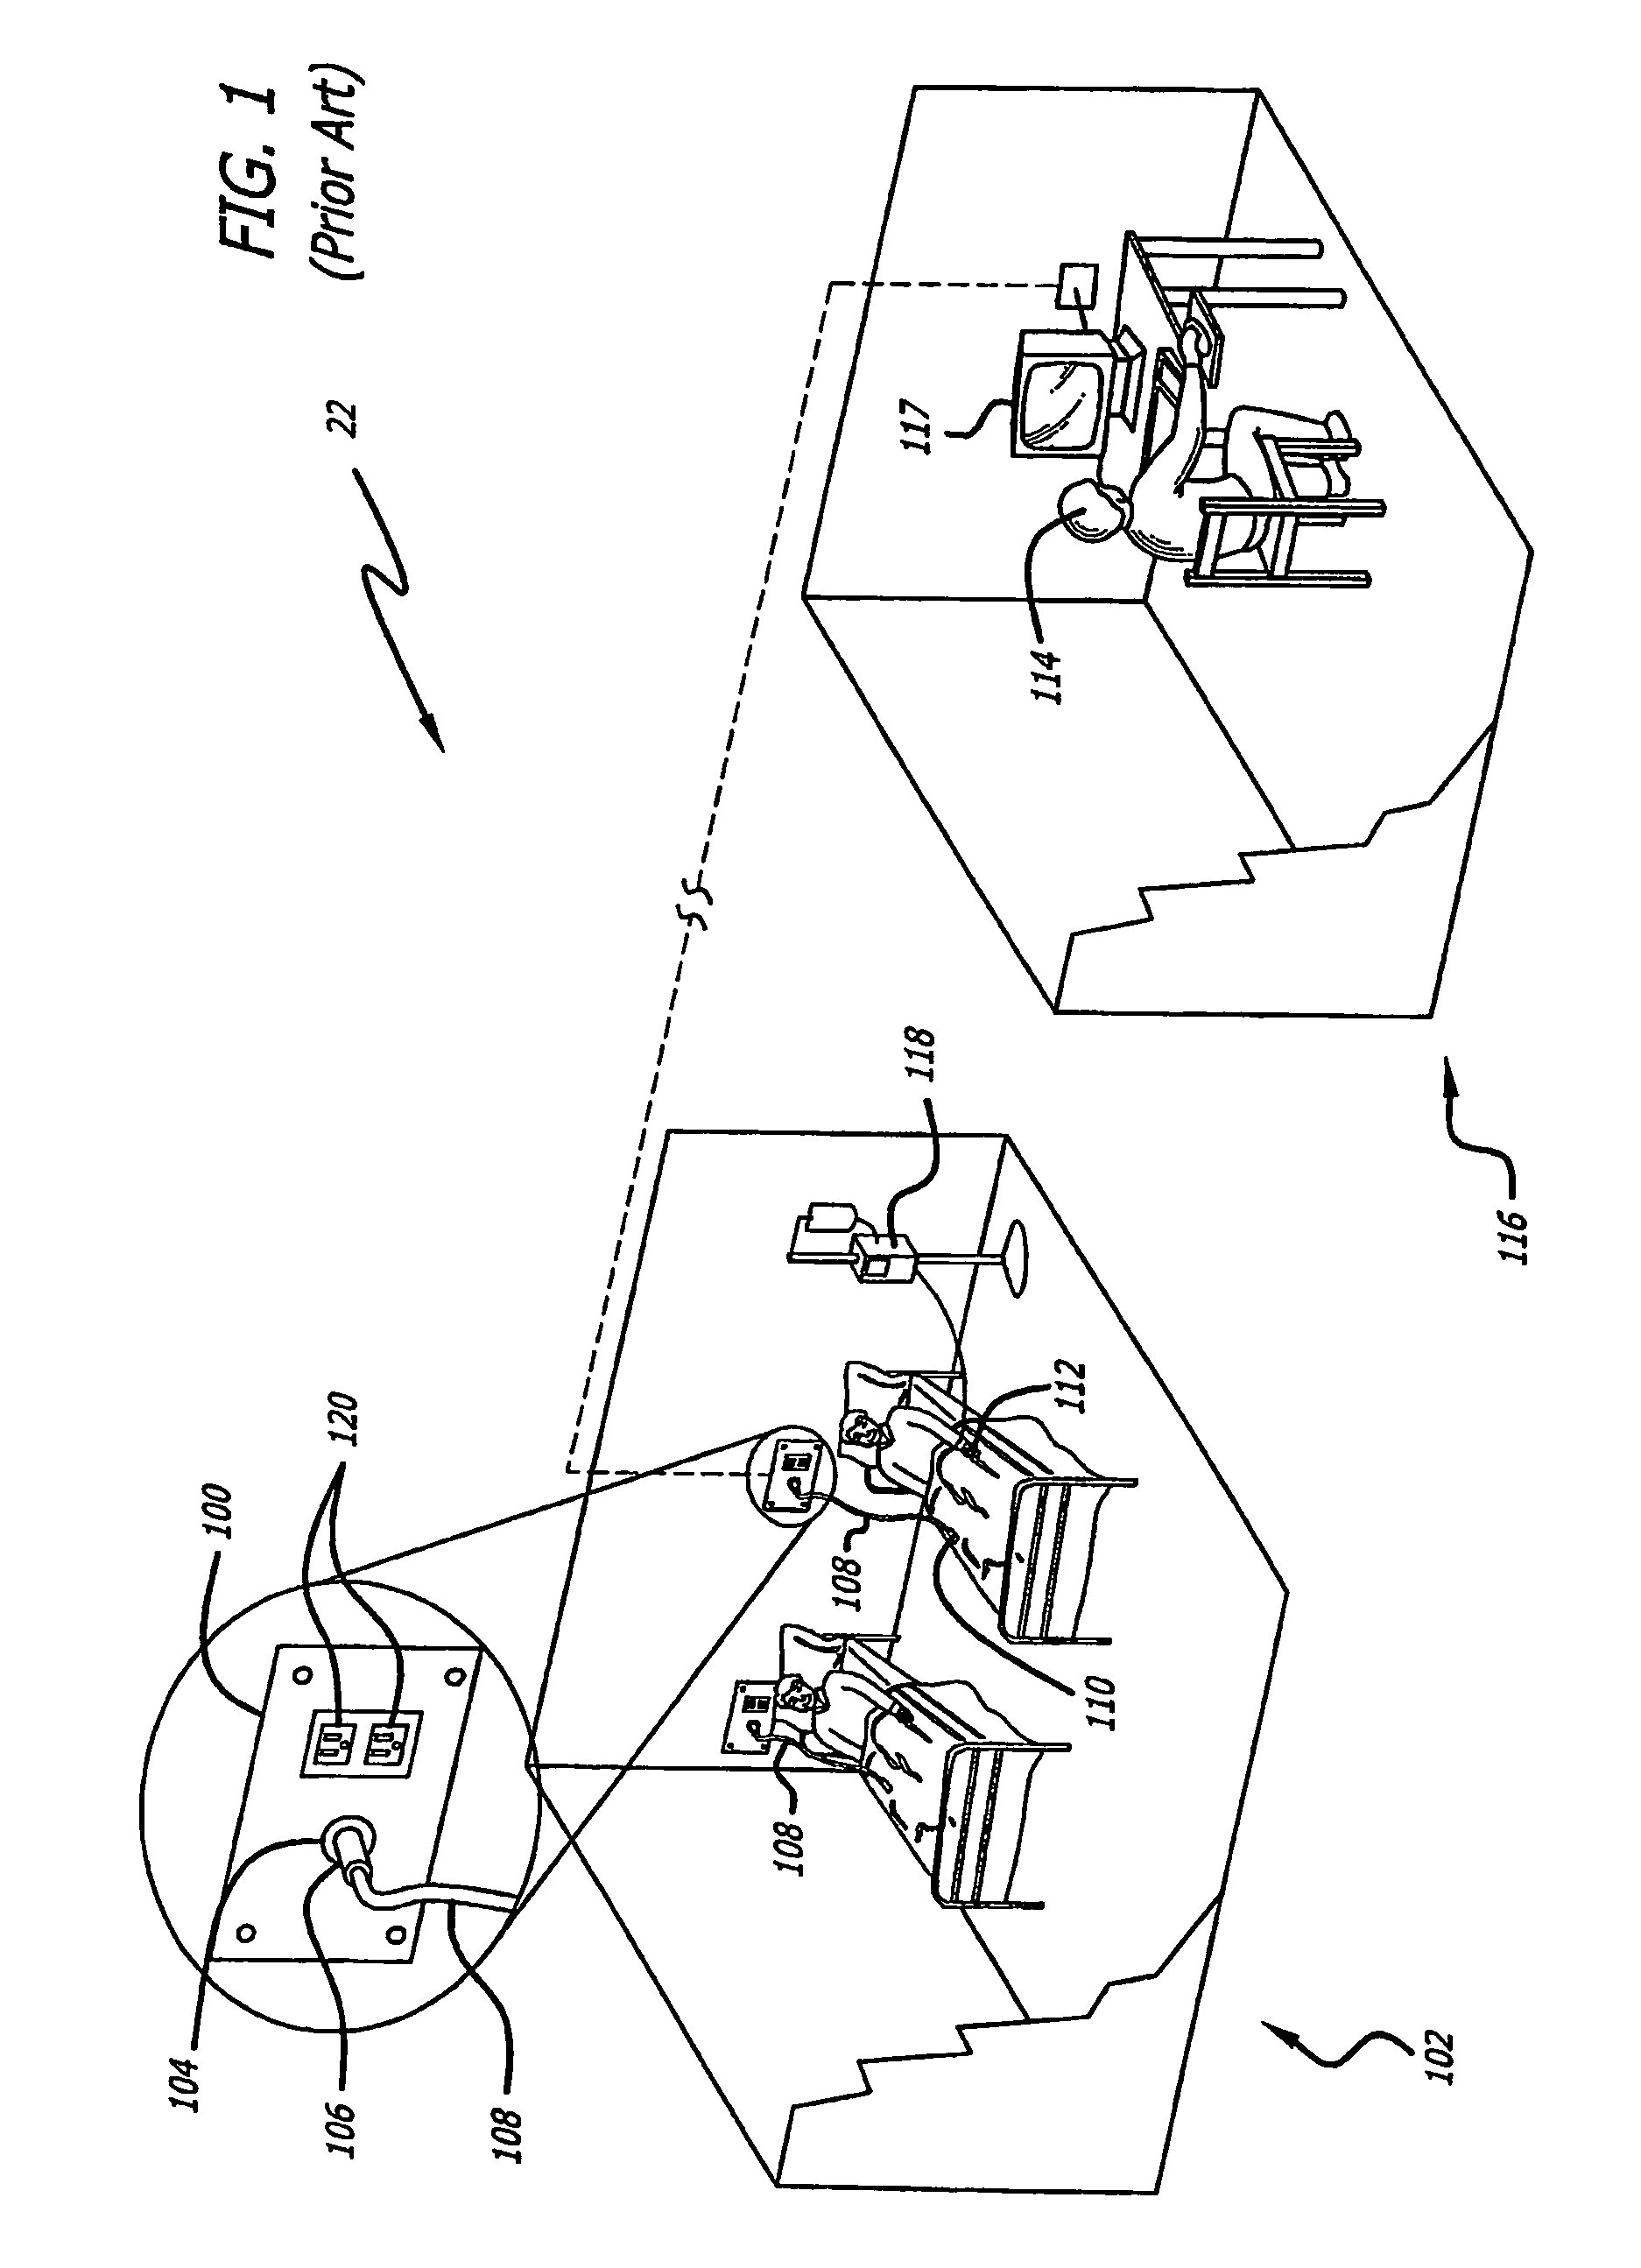 Medical notification apparatus and method